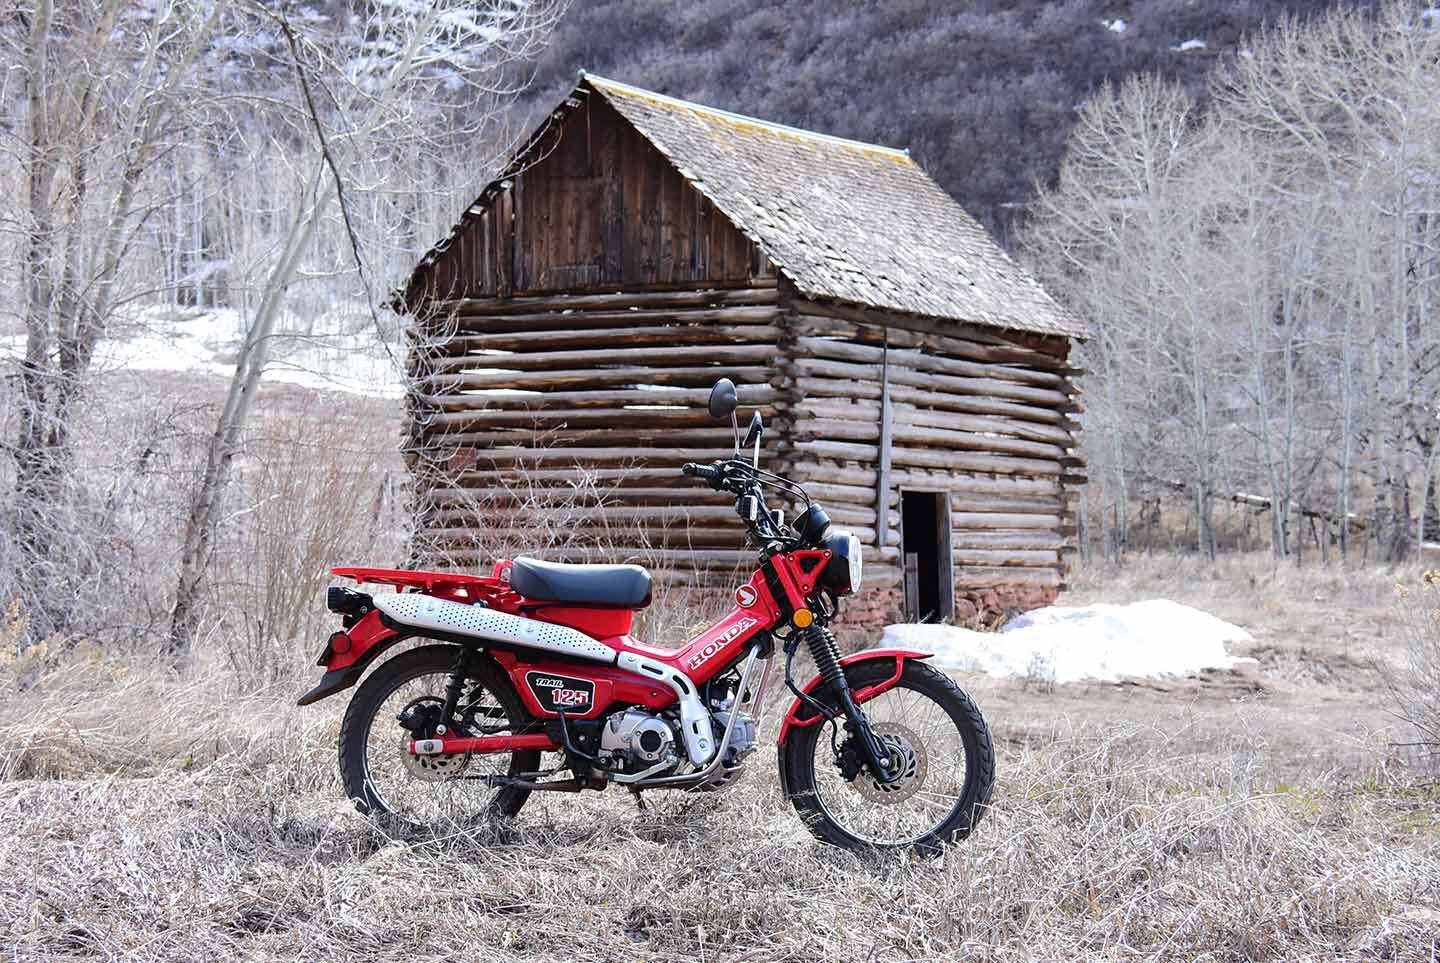 Honda’s Trail125 is totally at home in the Colorado Rockies.